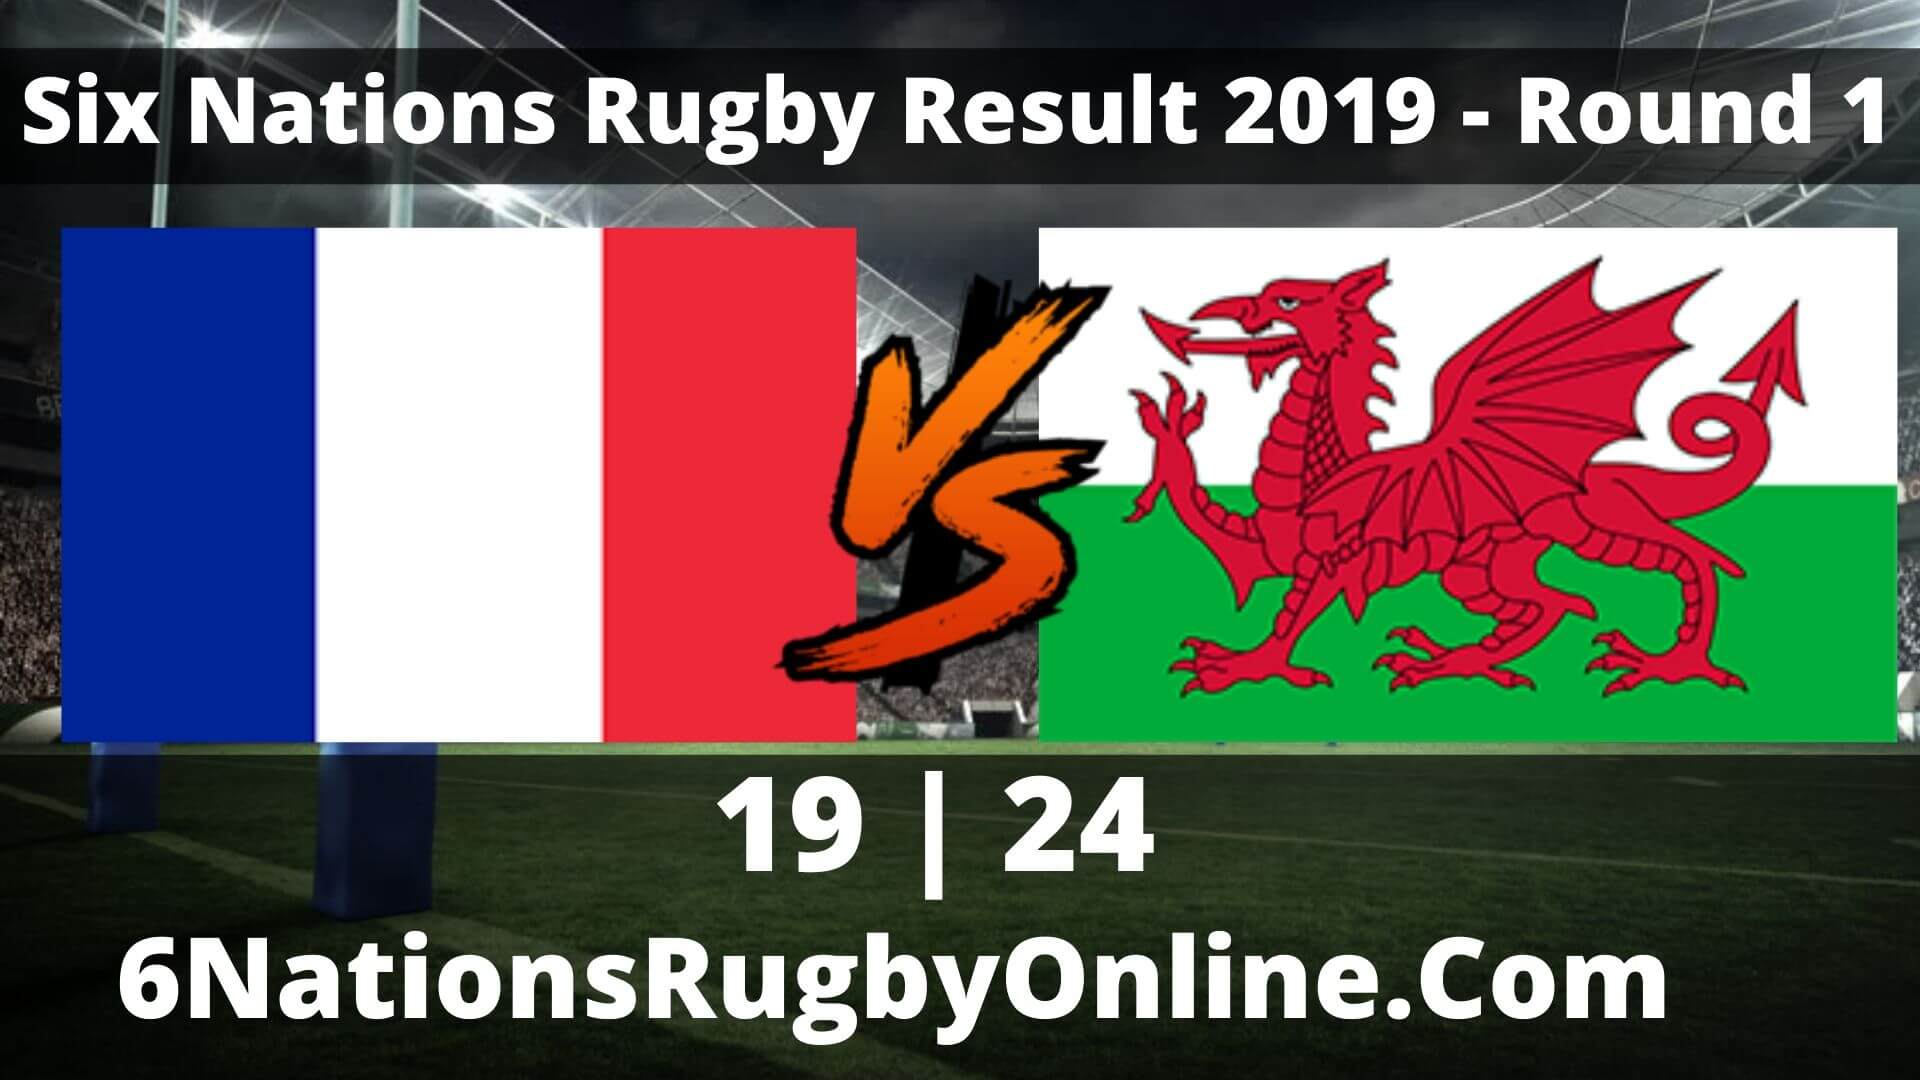 France vs wales Result 2019 | Six Nations Rugby Round 1